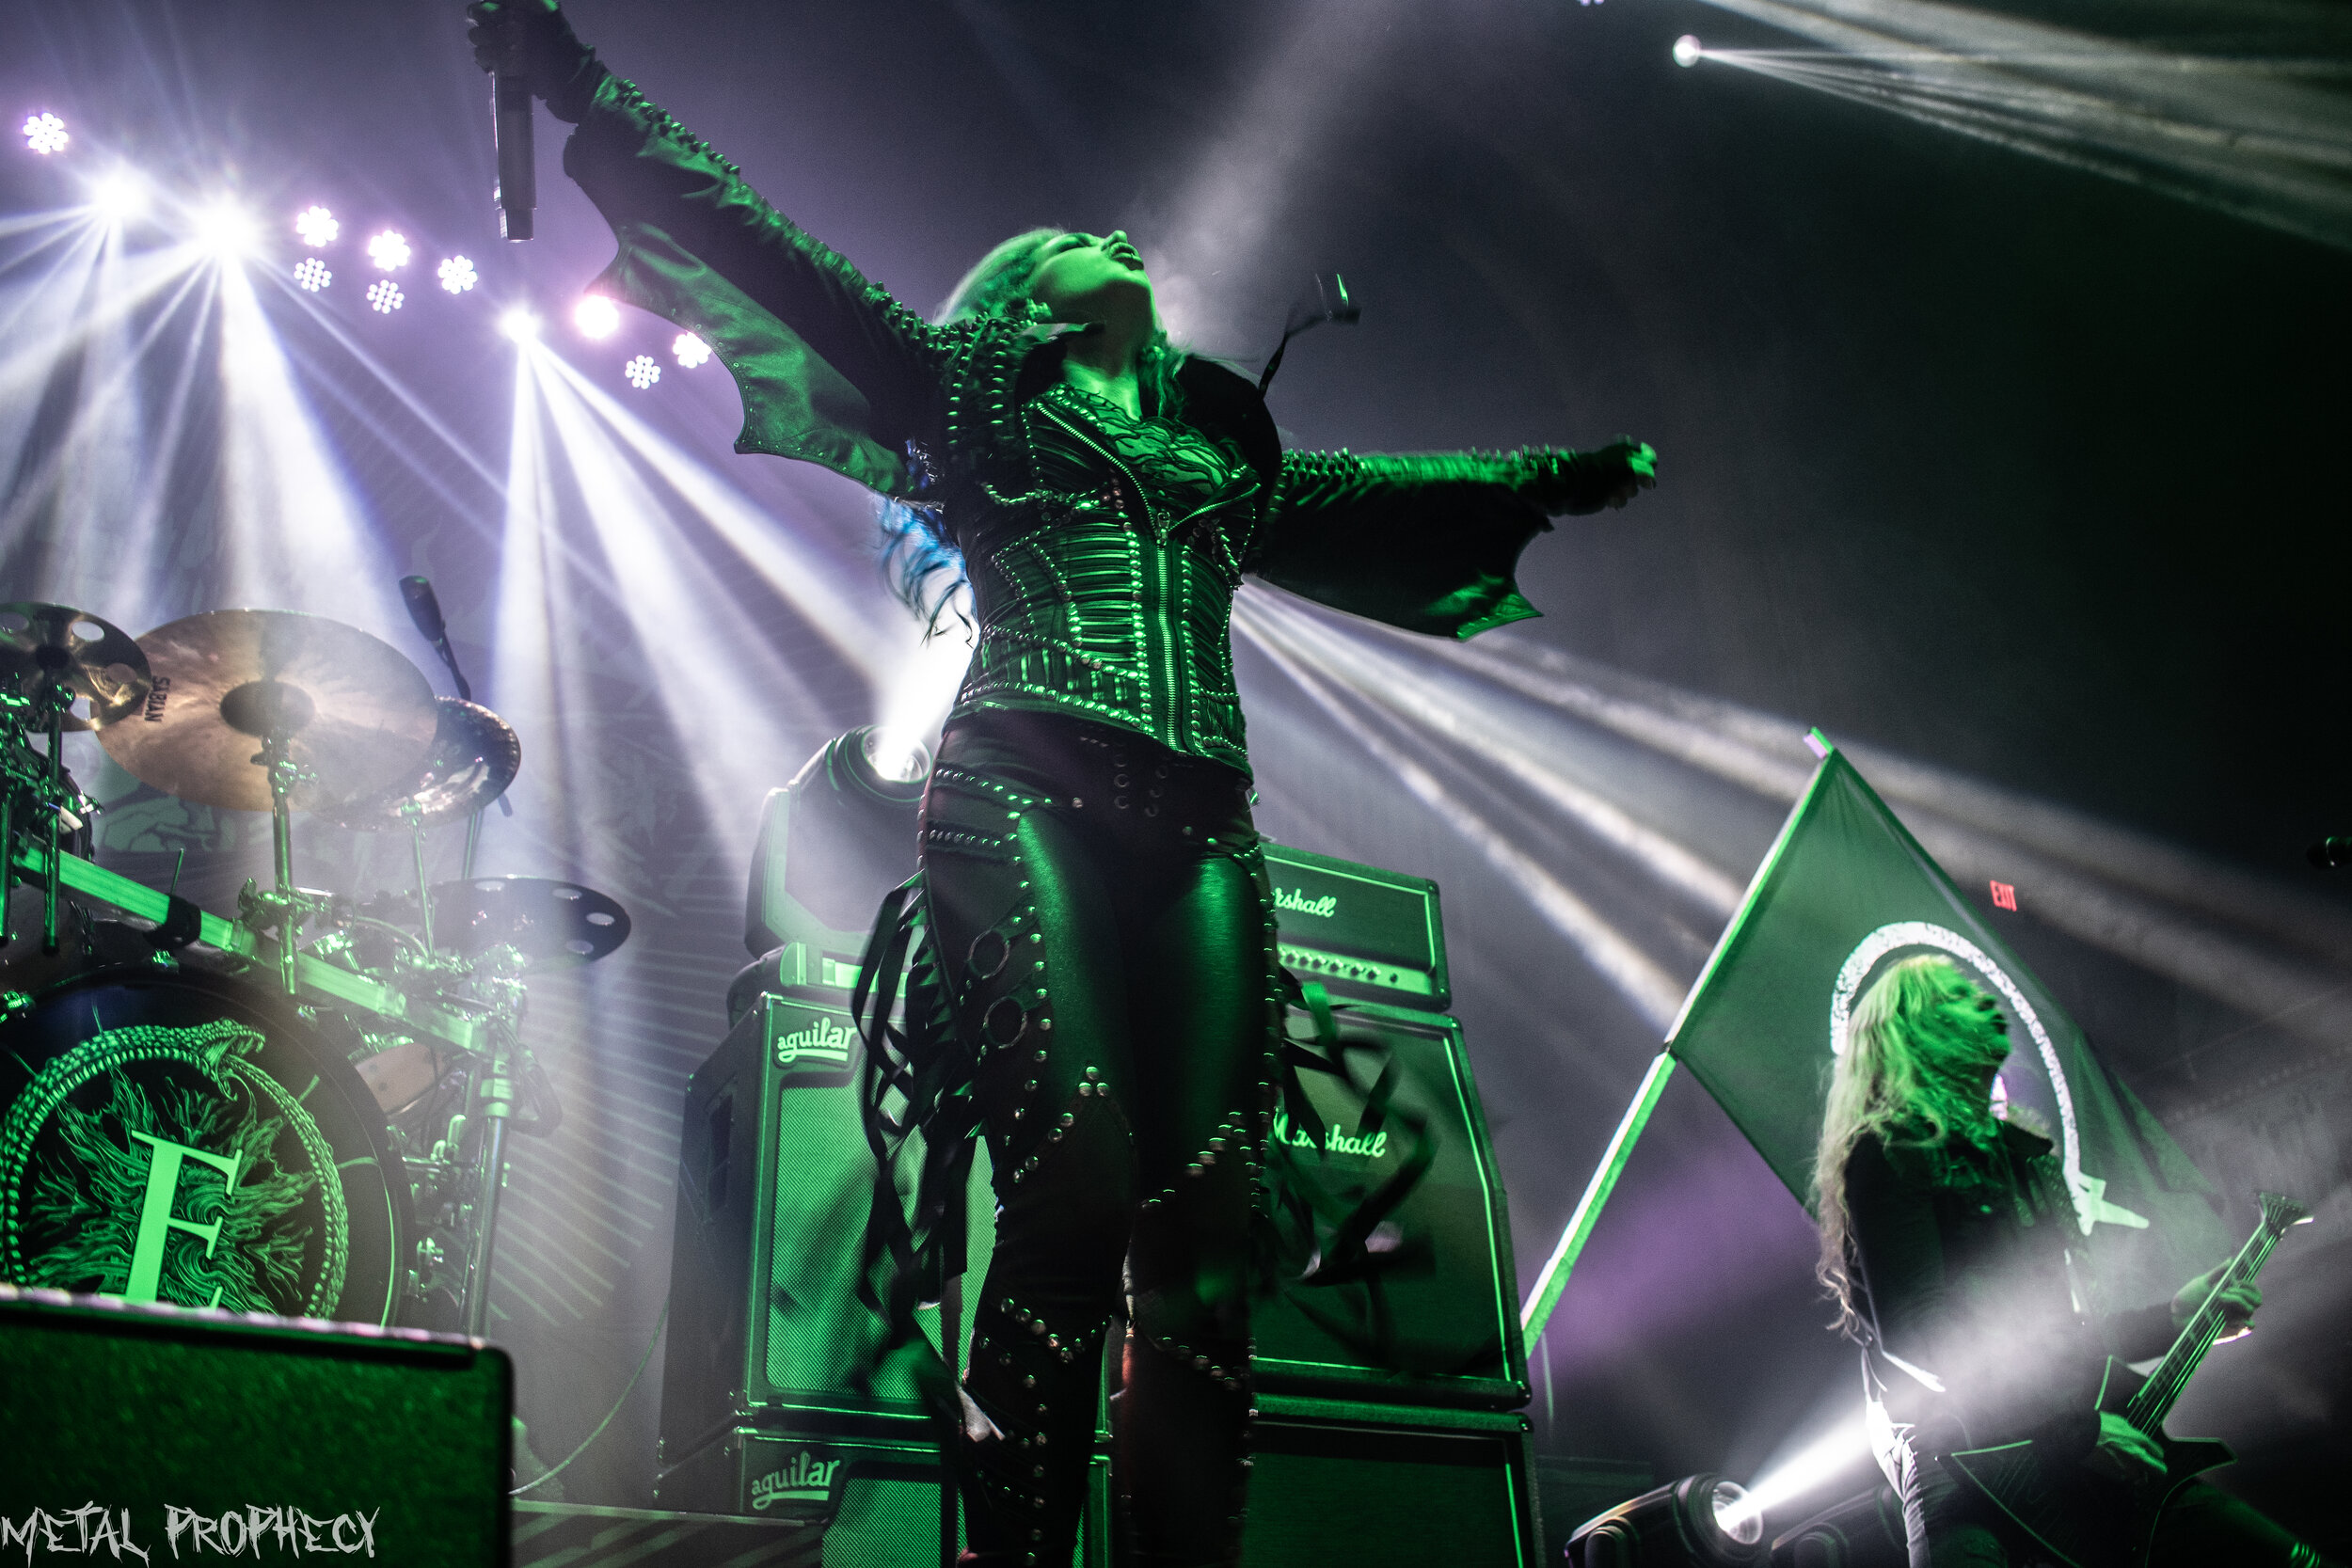 Arch Enemy at The Tabernacle